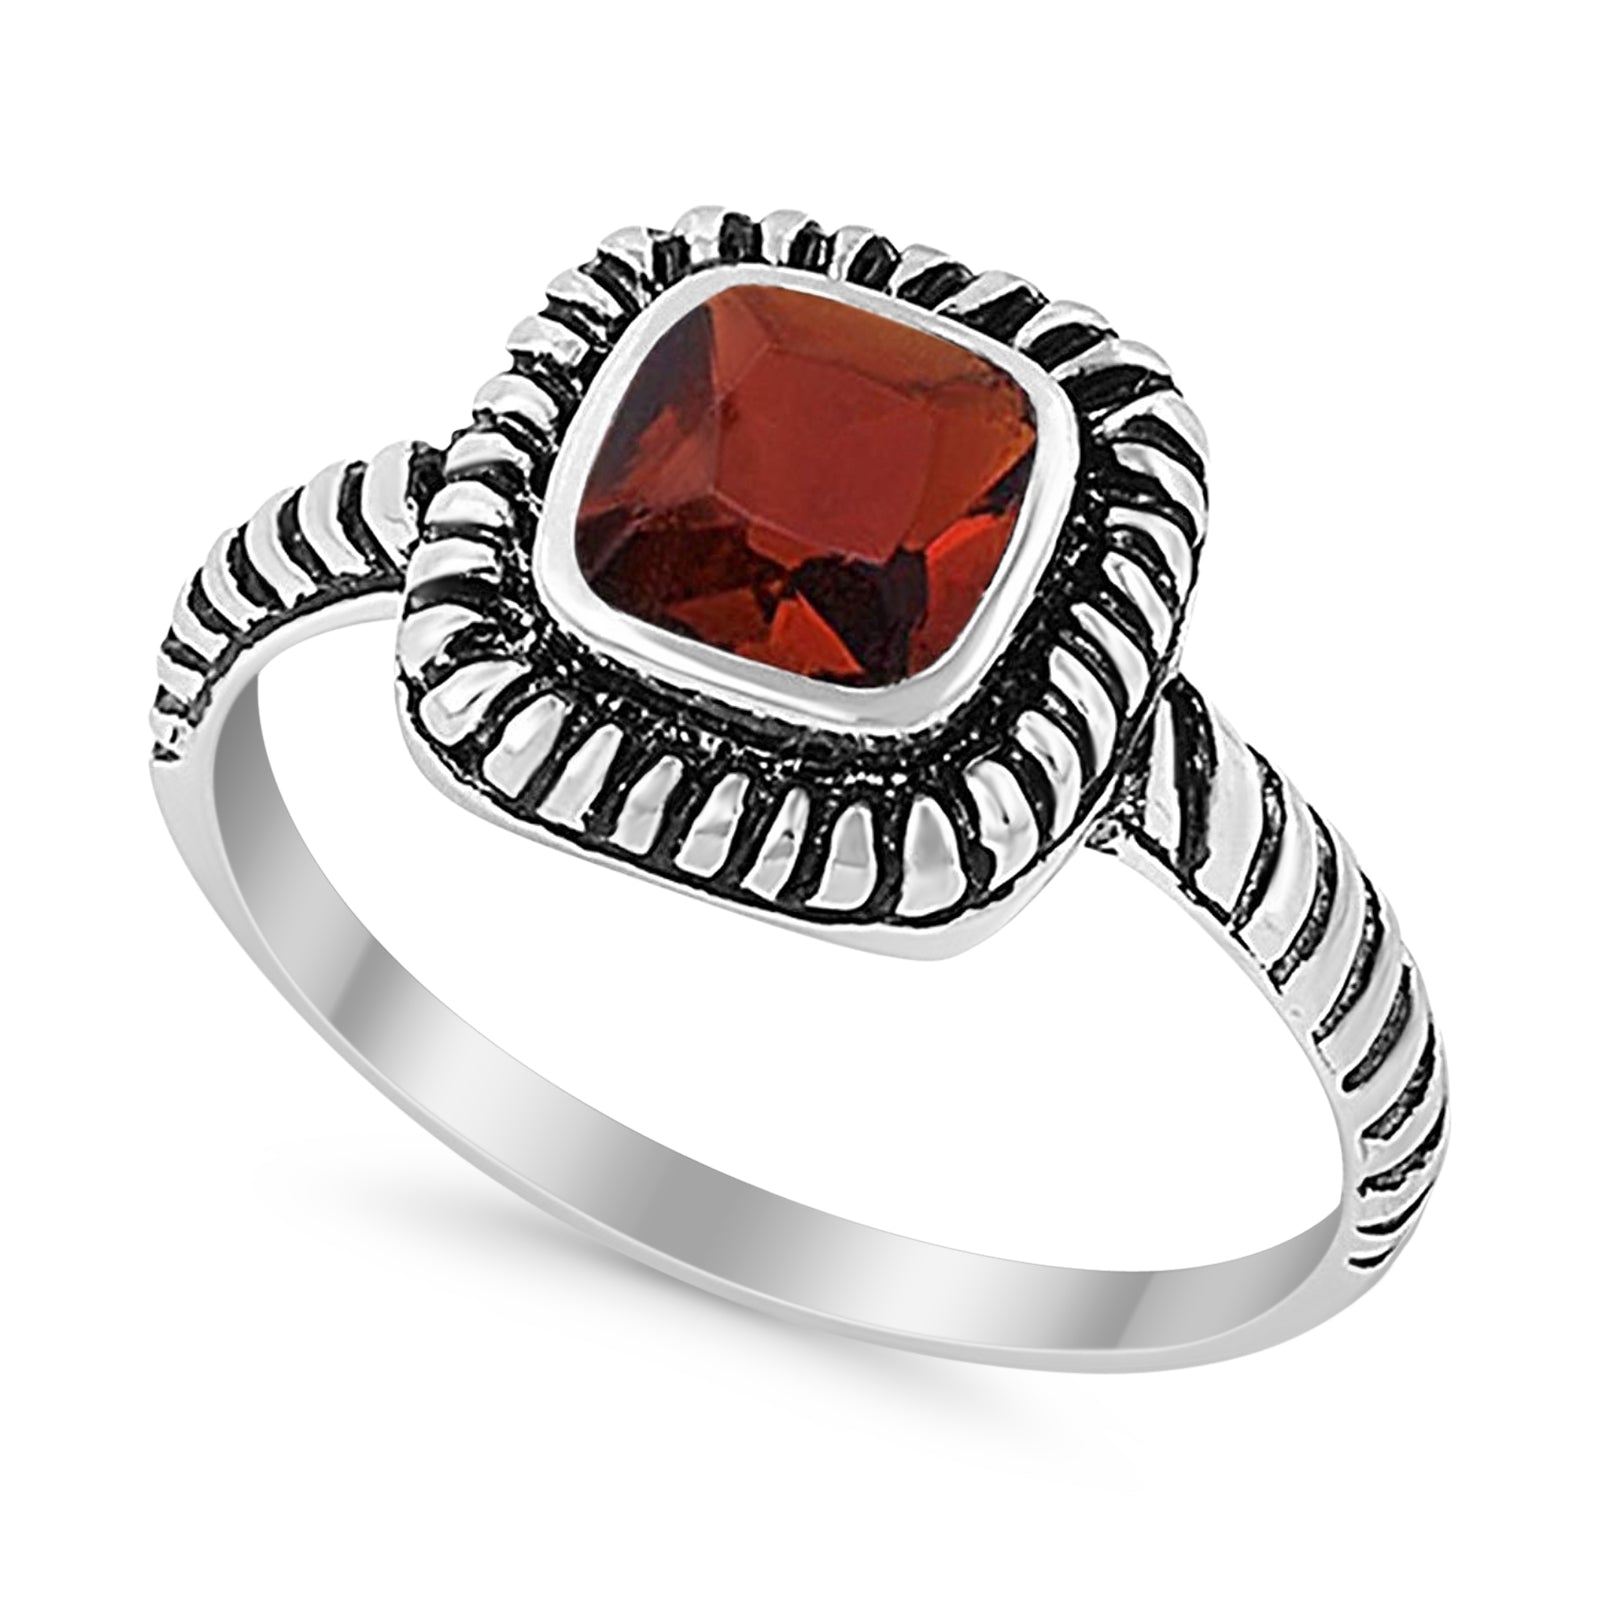 Princess Cut Simulated Red Garnet Cubic Zirconia Oxidized Design Ring 925 Sterling Silver